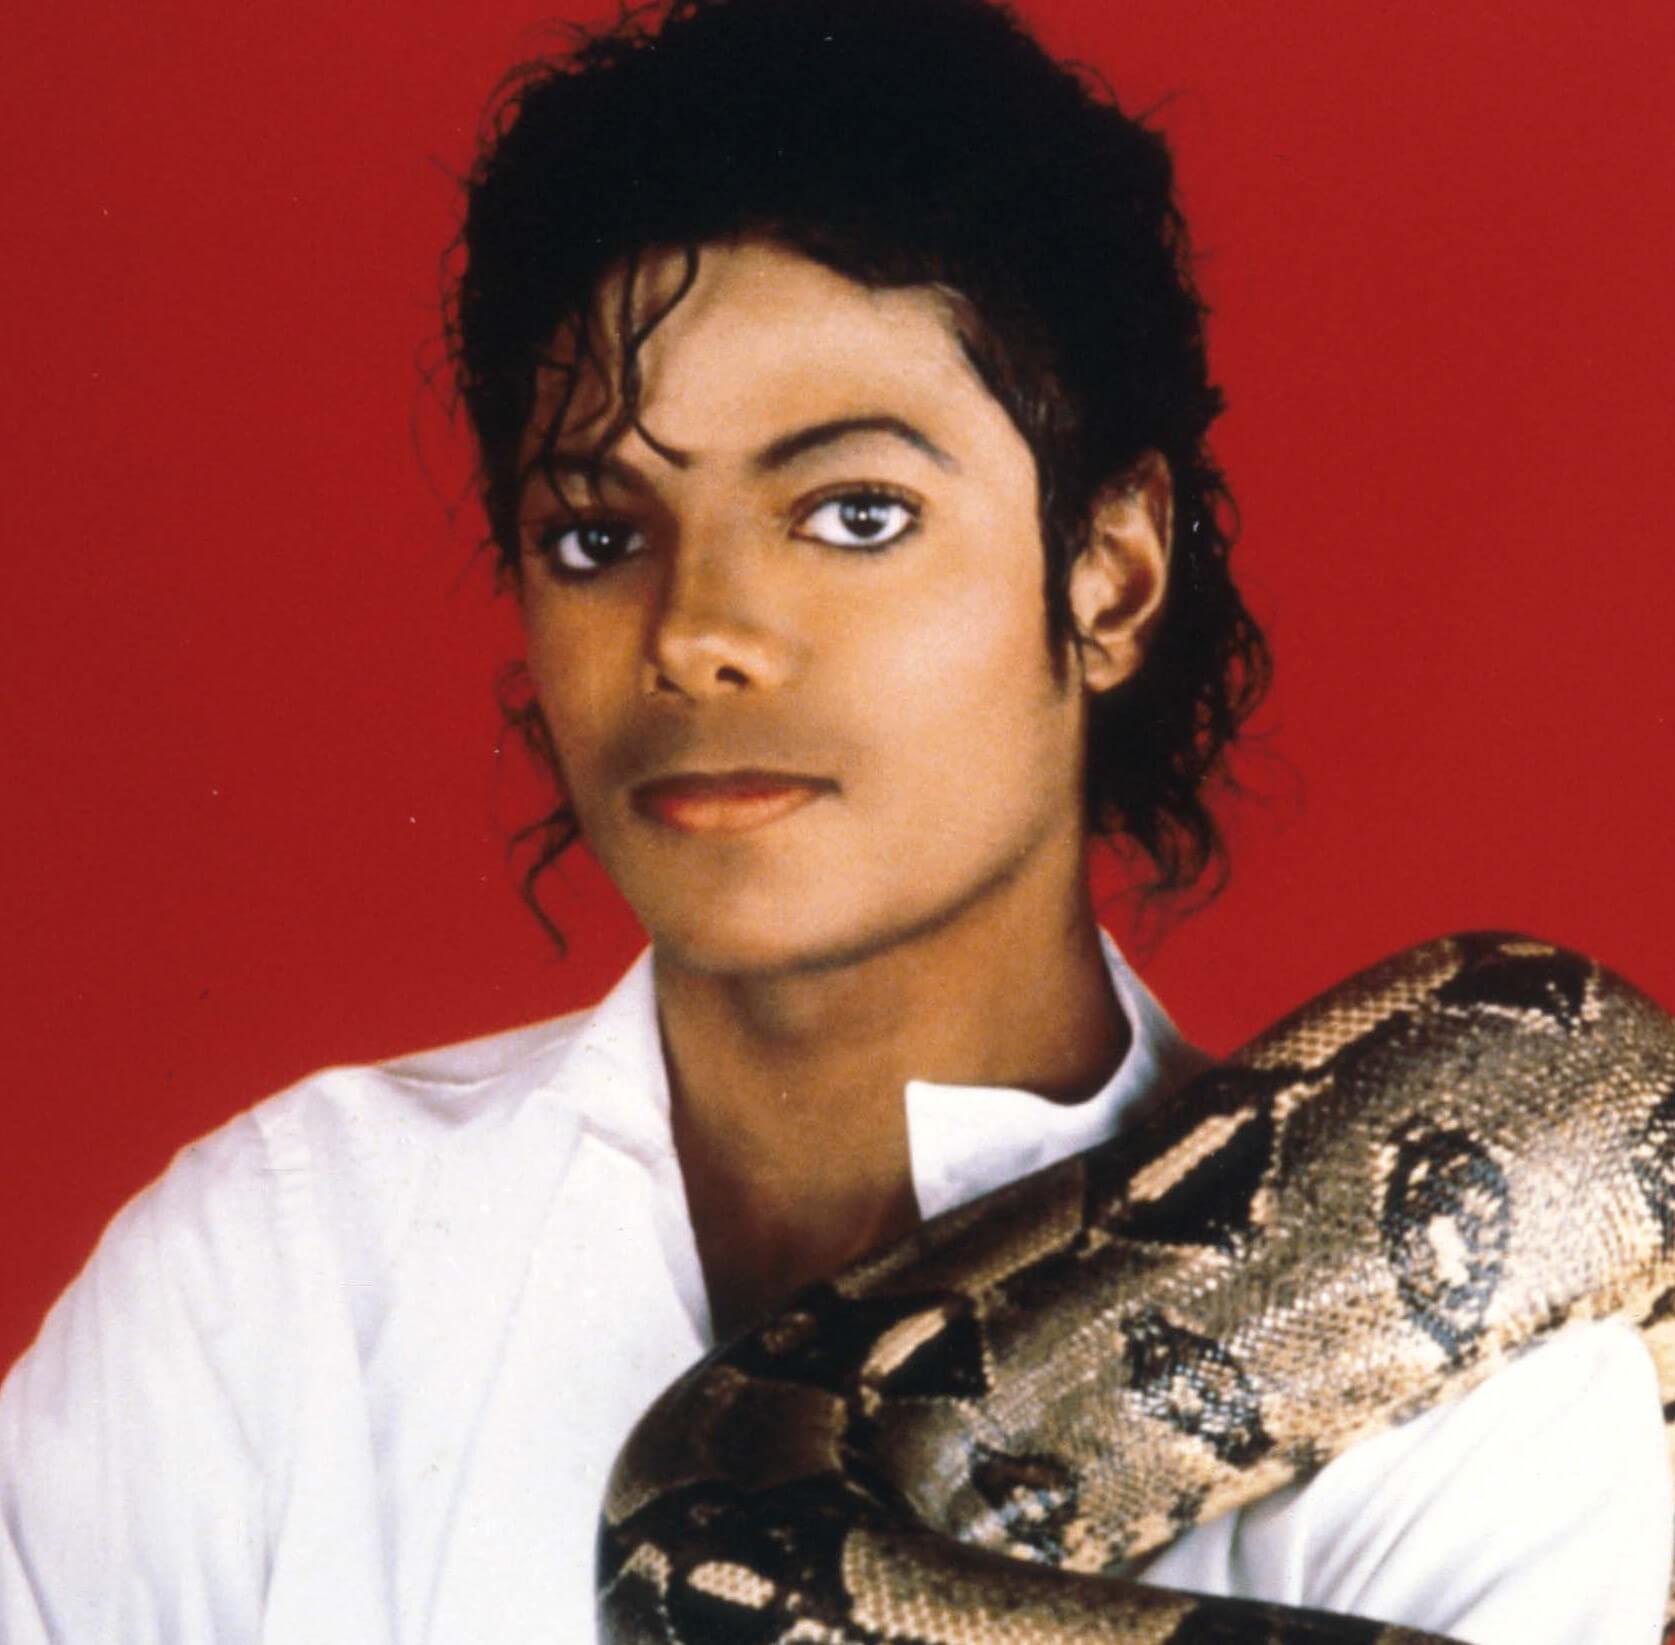 Michael Jackson with a snake